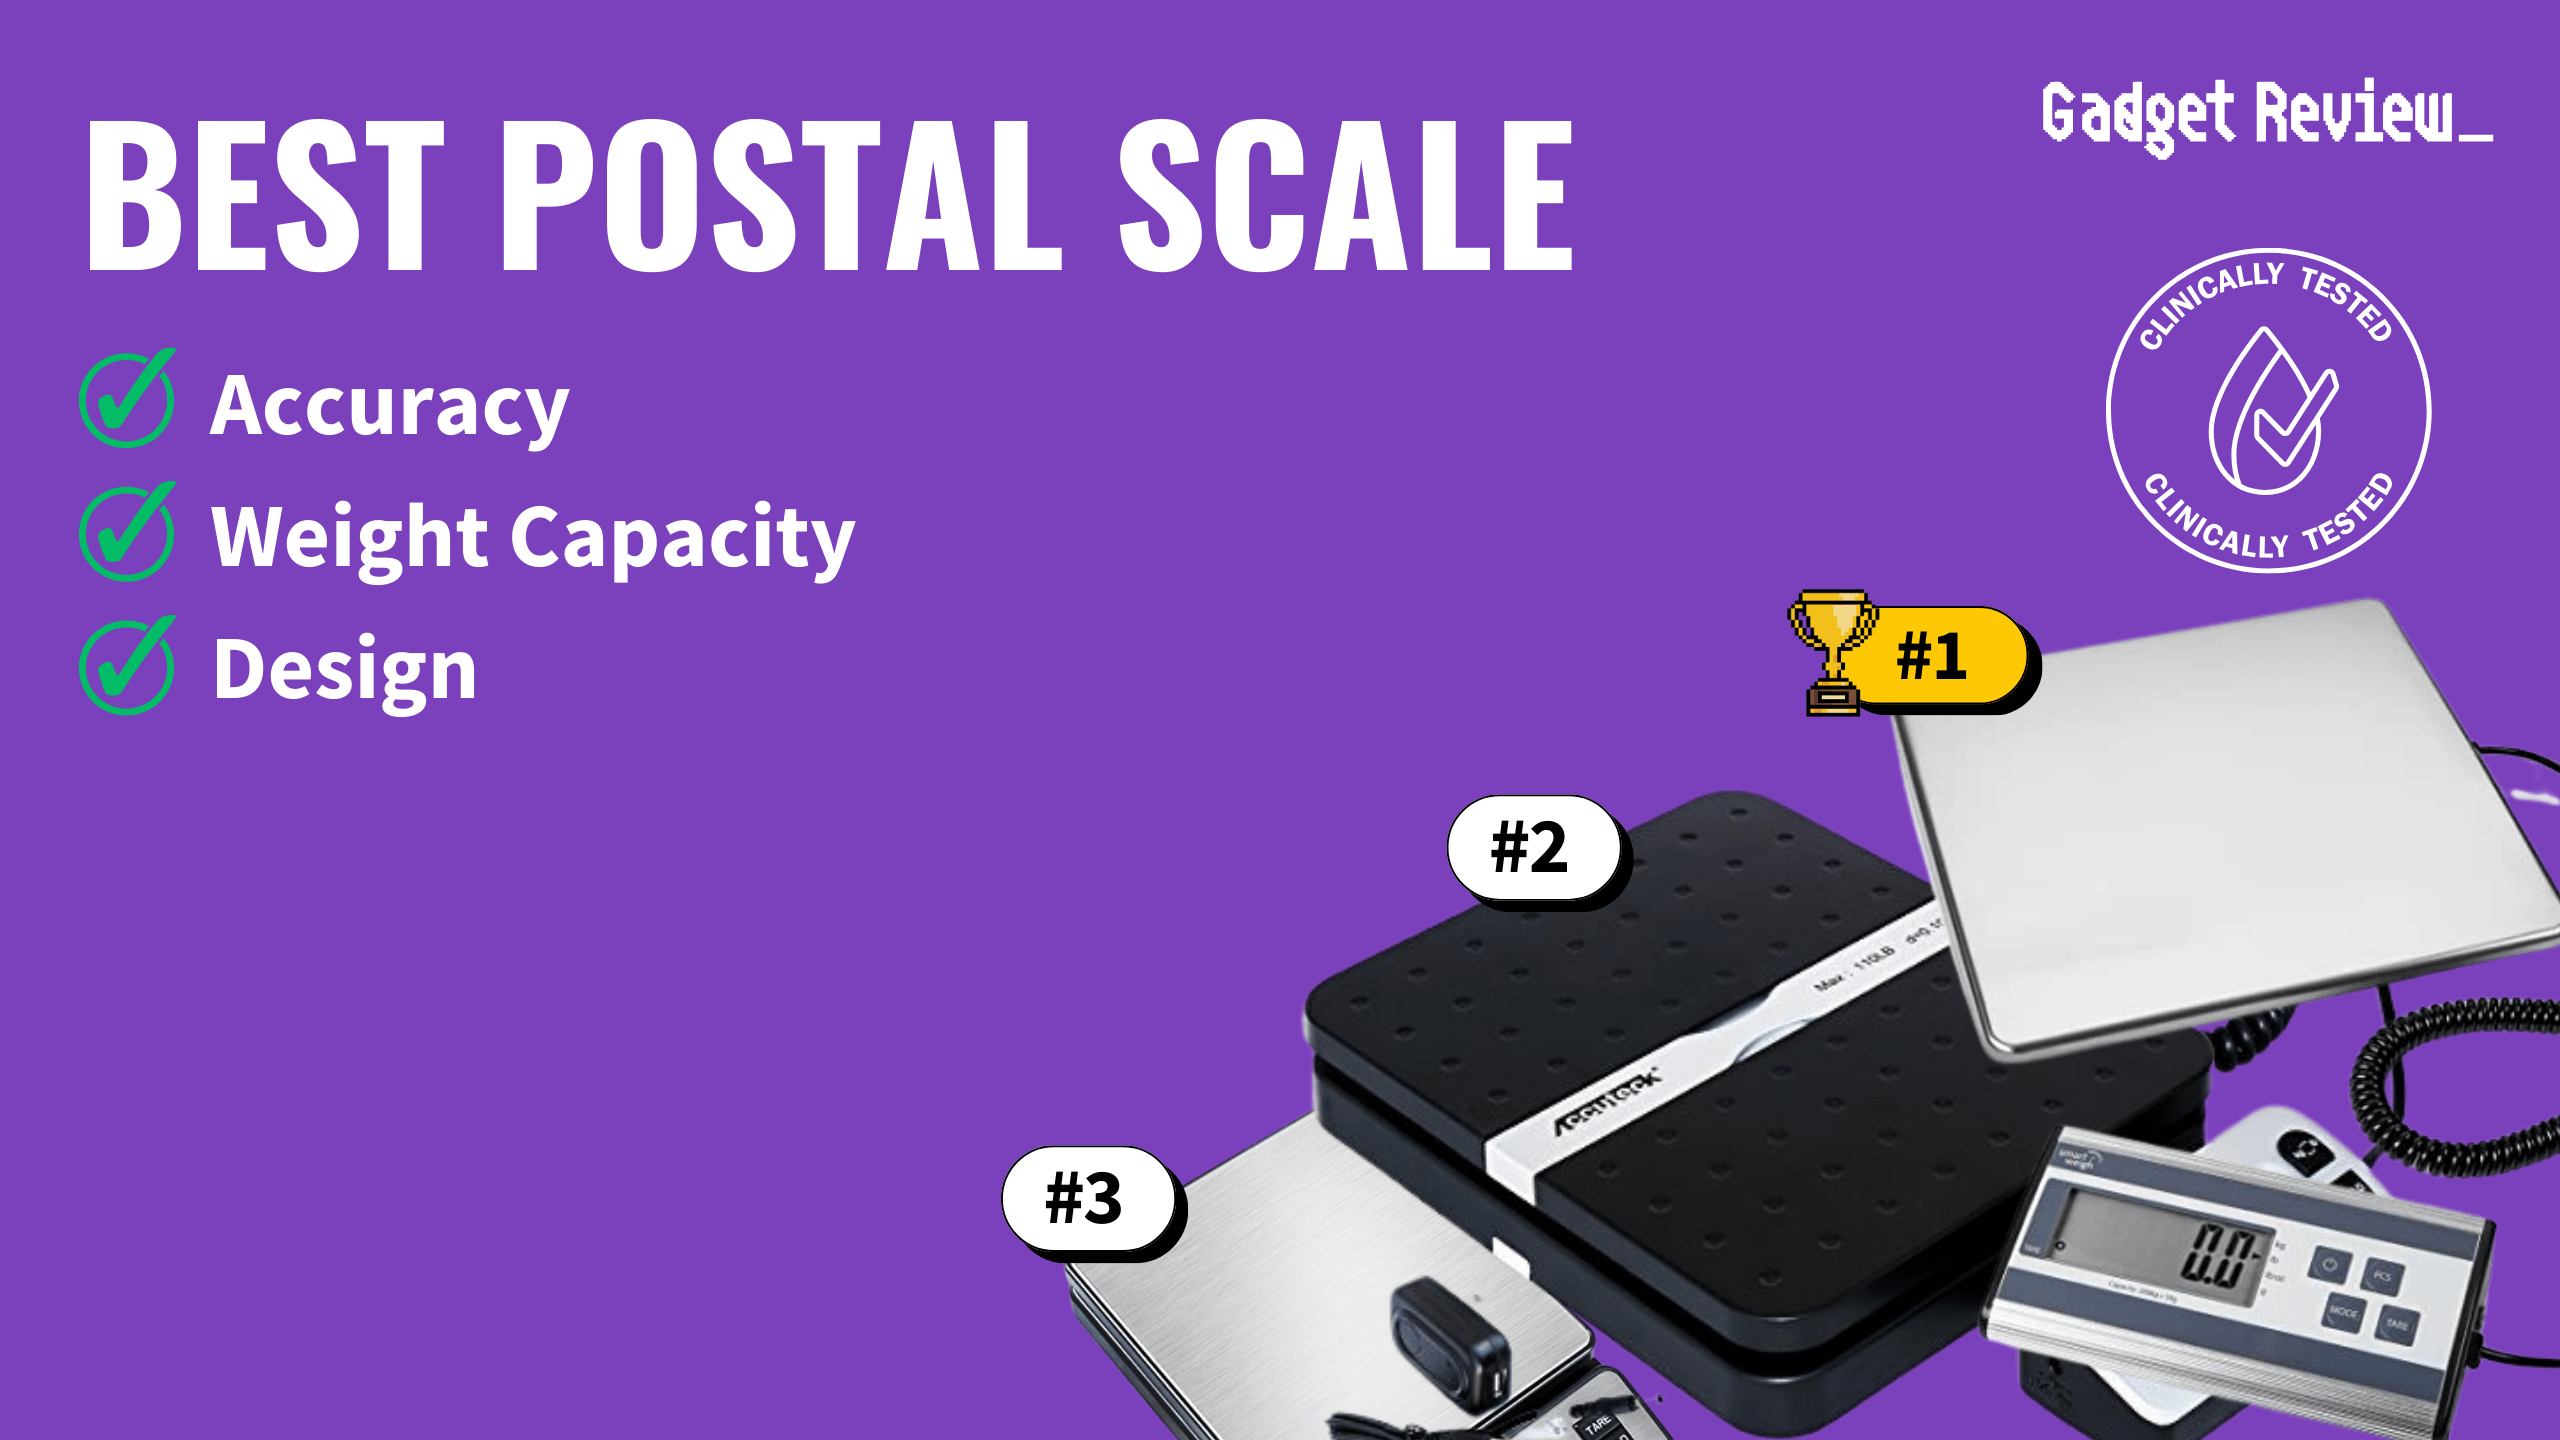 best postal scale featured image that shows the top three best office product models